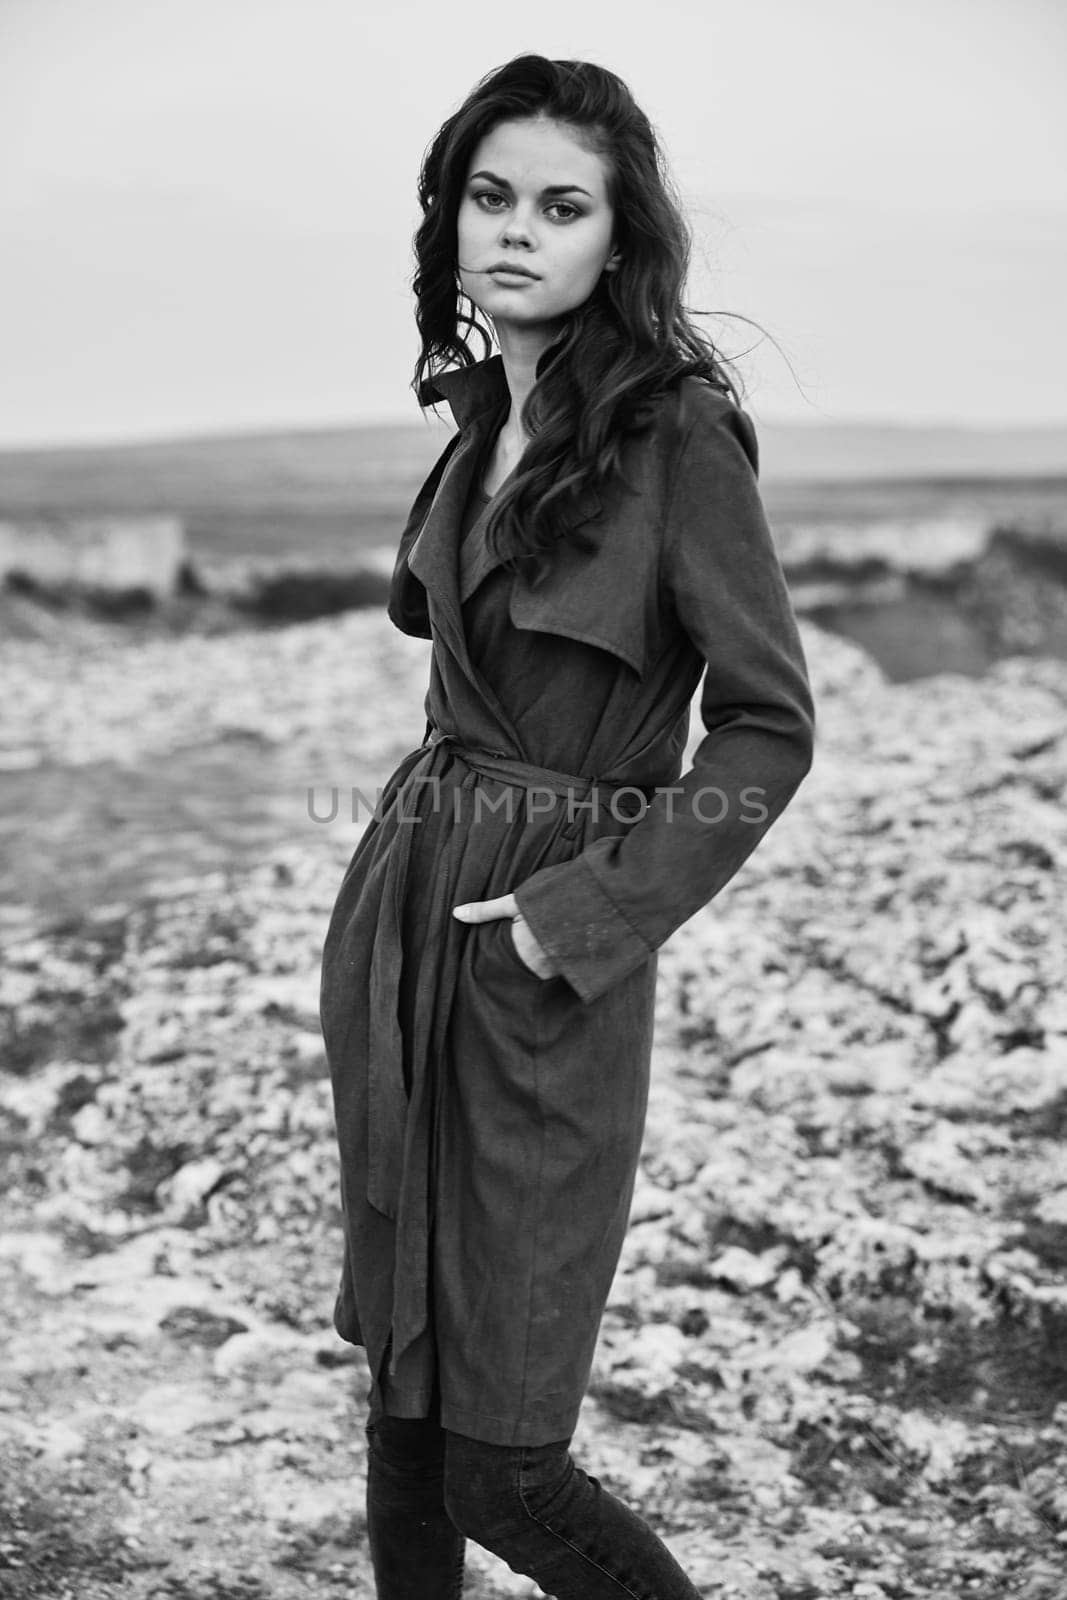 Mysterious woman in trench coat standing confidently on rocky hilltop by Vichizh